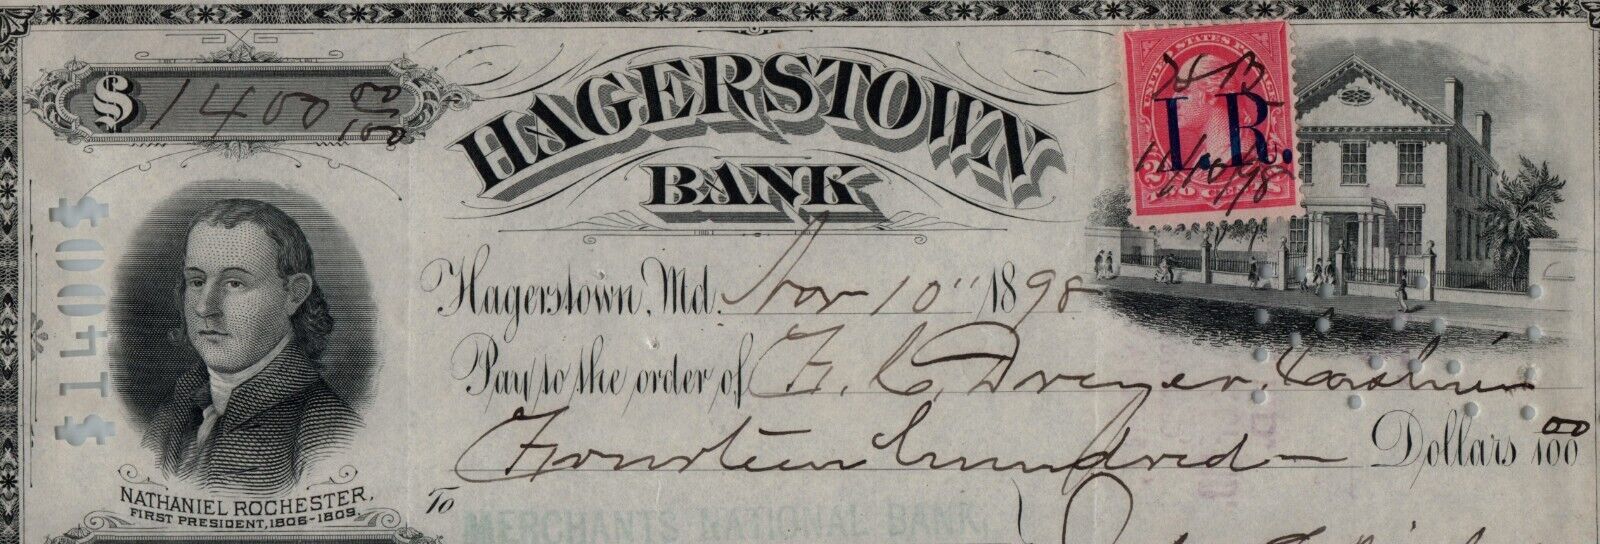 Vintage 1898 Bank Check Cheque HAGERSTOWN BANK Maryland with Revenue Stamp